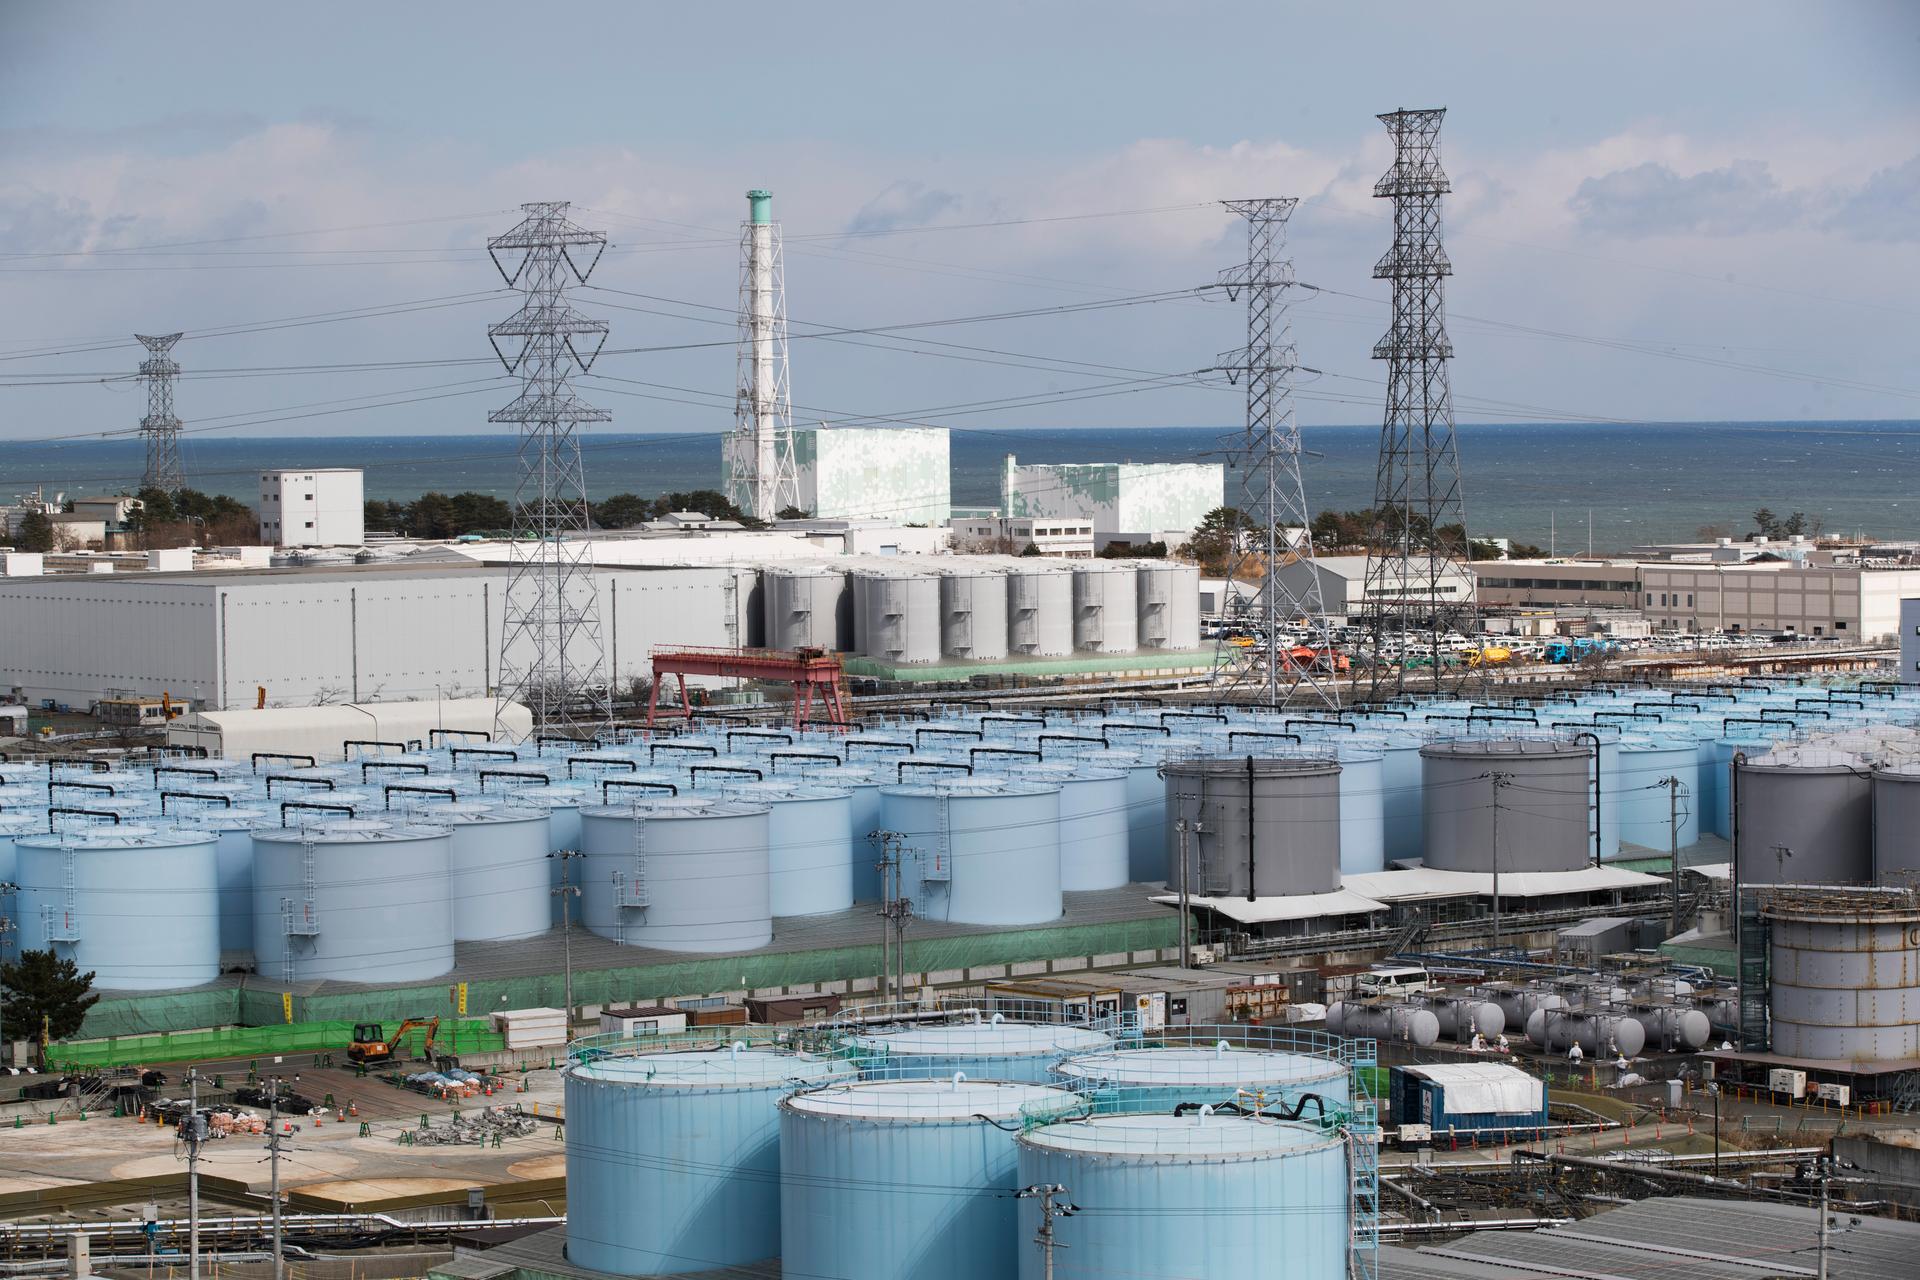 Nuclear reactors of No. 5, center left, and 6 look over tanks storing water that was treated but still radioactive, at the Fukushima Daiichi nuclear power plant